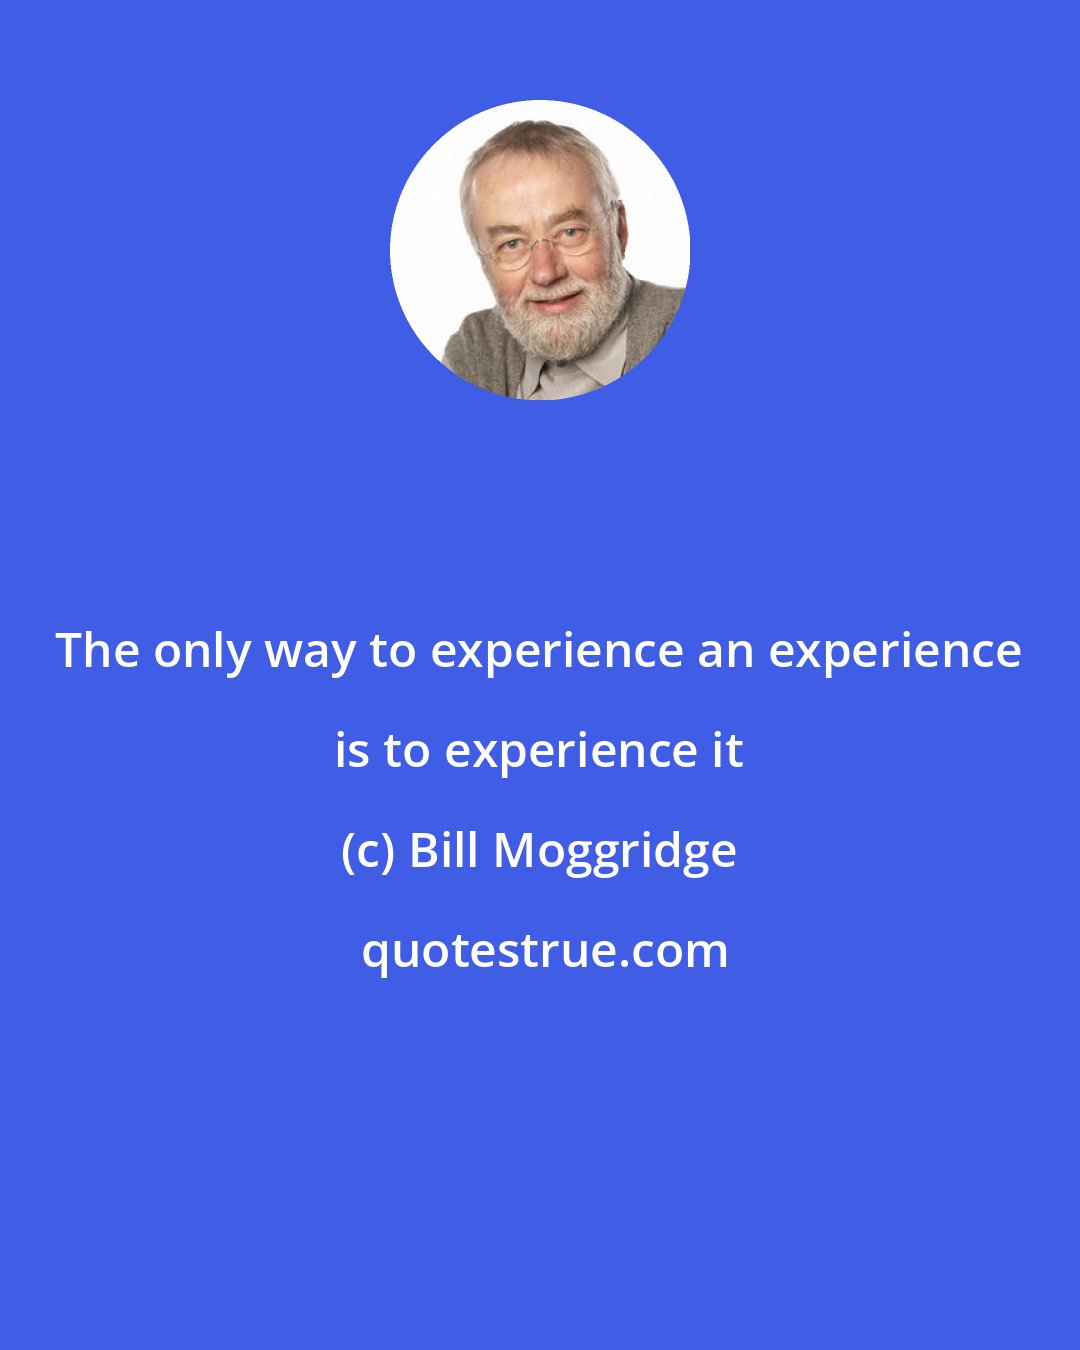 Bill Moggridge: The only way to experience an experience is to experience it